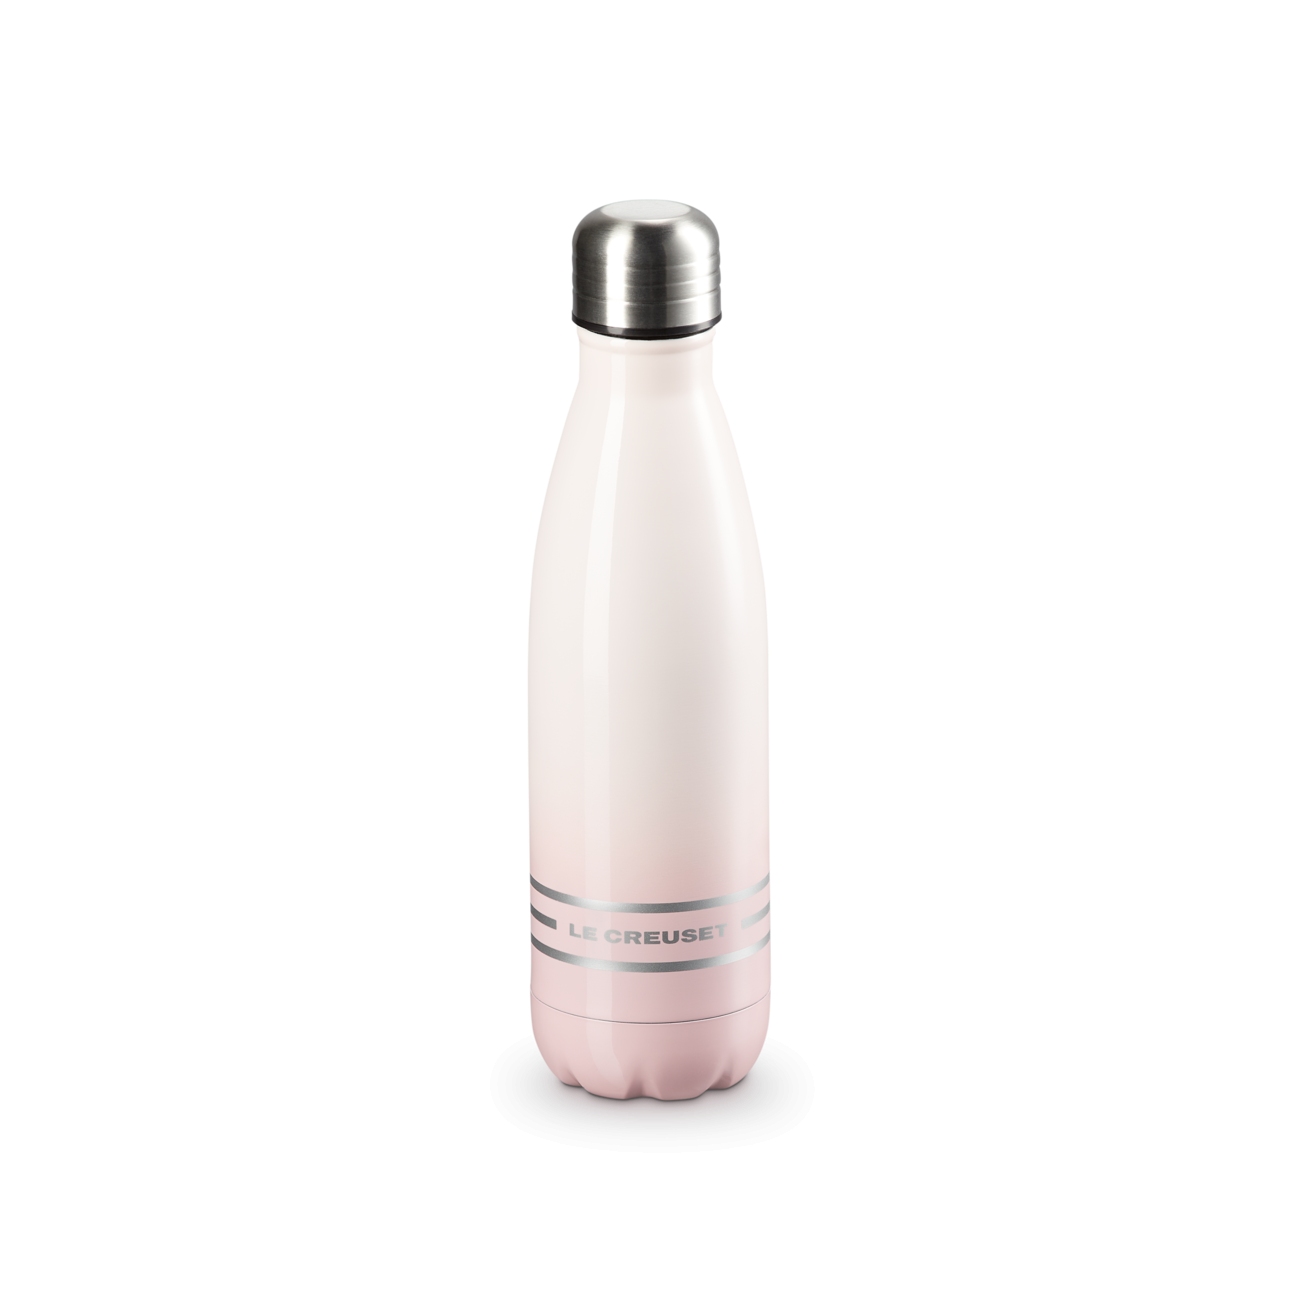 Le Creuset Hydration Bottle 500 ml Shell Pink